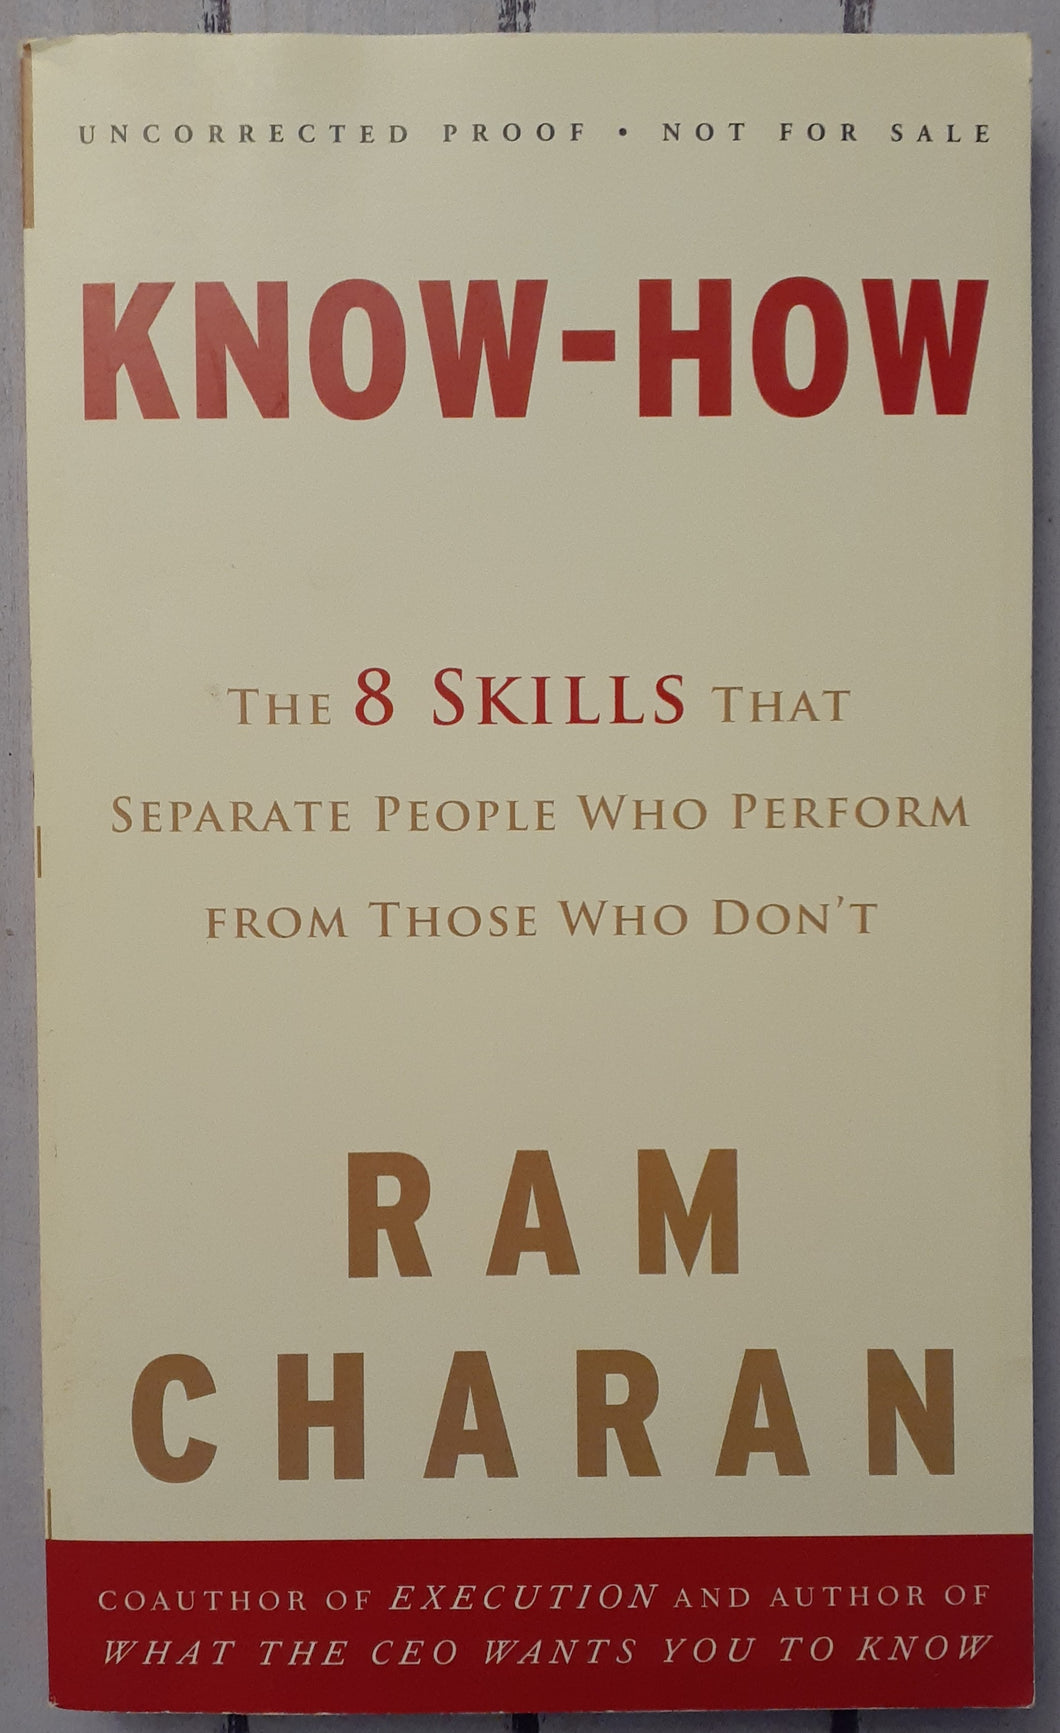 Know-How: The 8 Skills That Separate People Who Perform From Those Who Don't